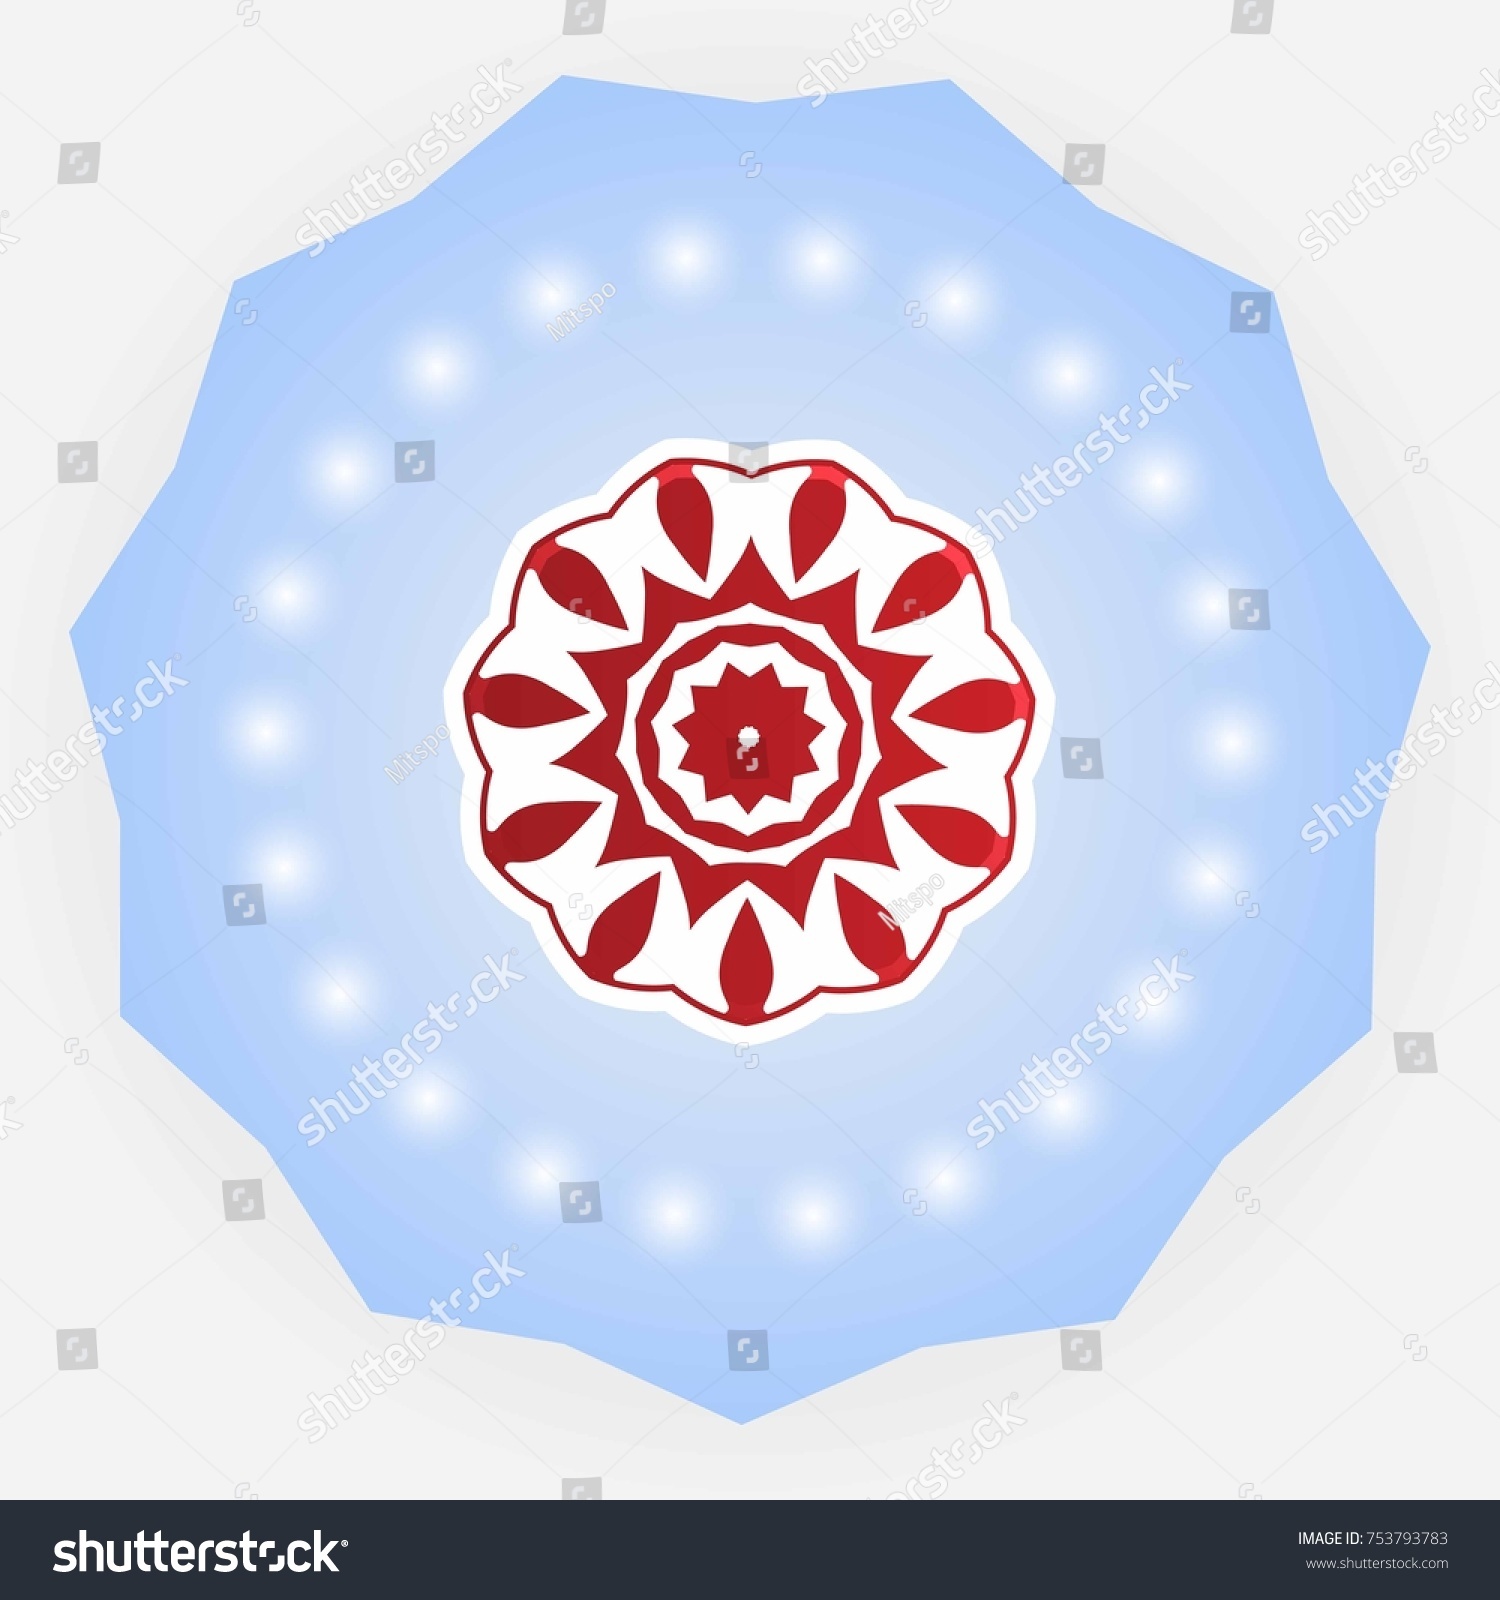 Calligraphy Abstract Floral Symmetry Element Vector Stock Vector ...